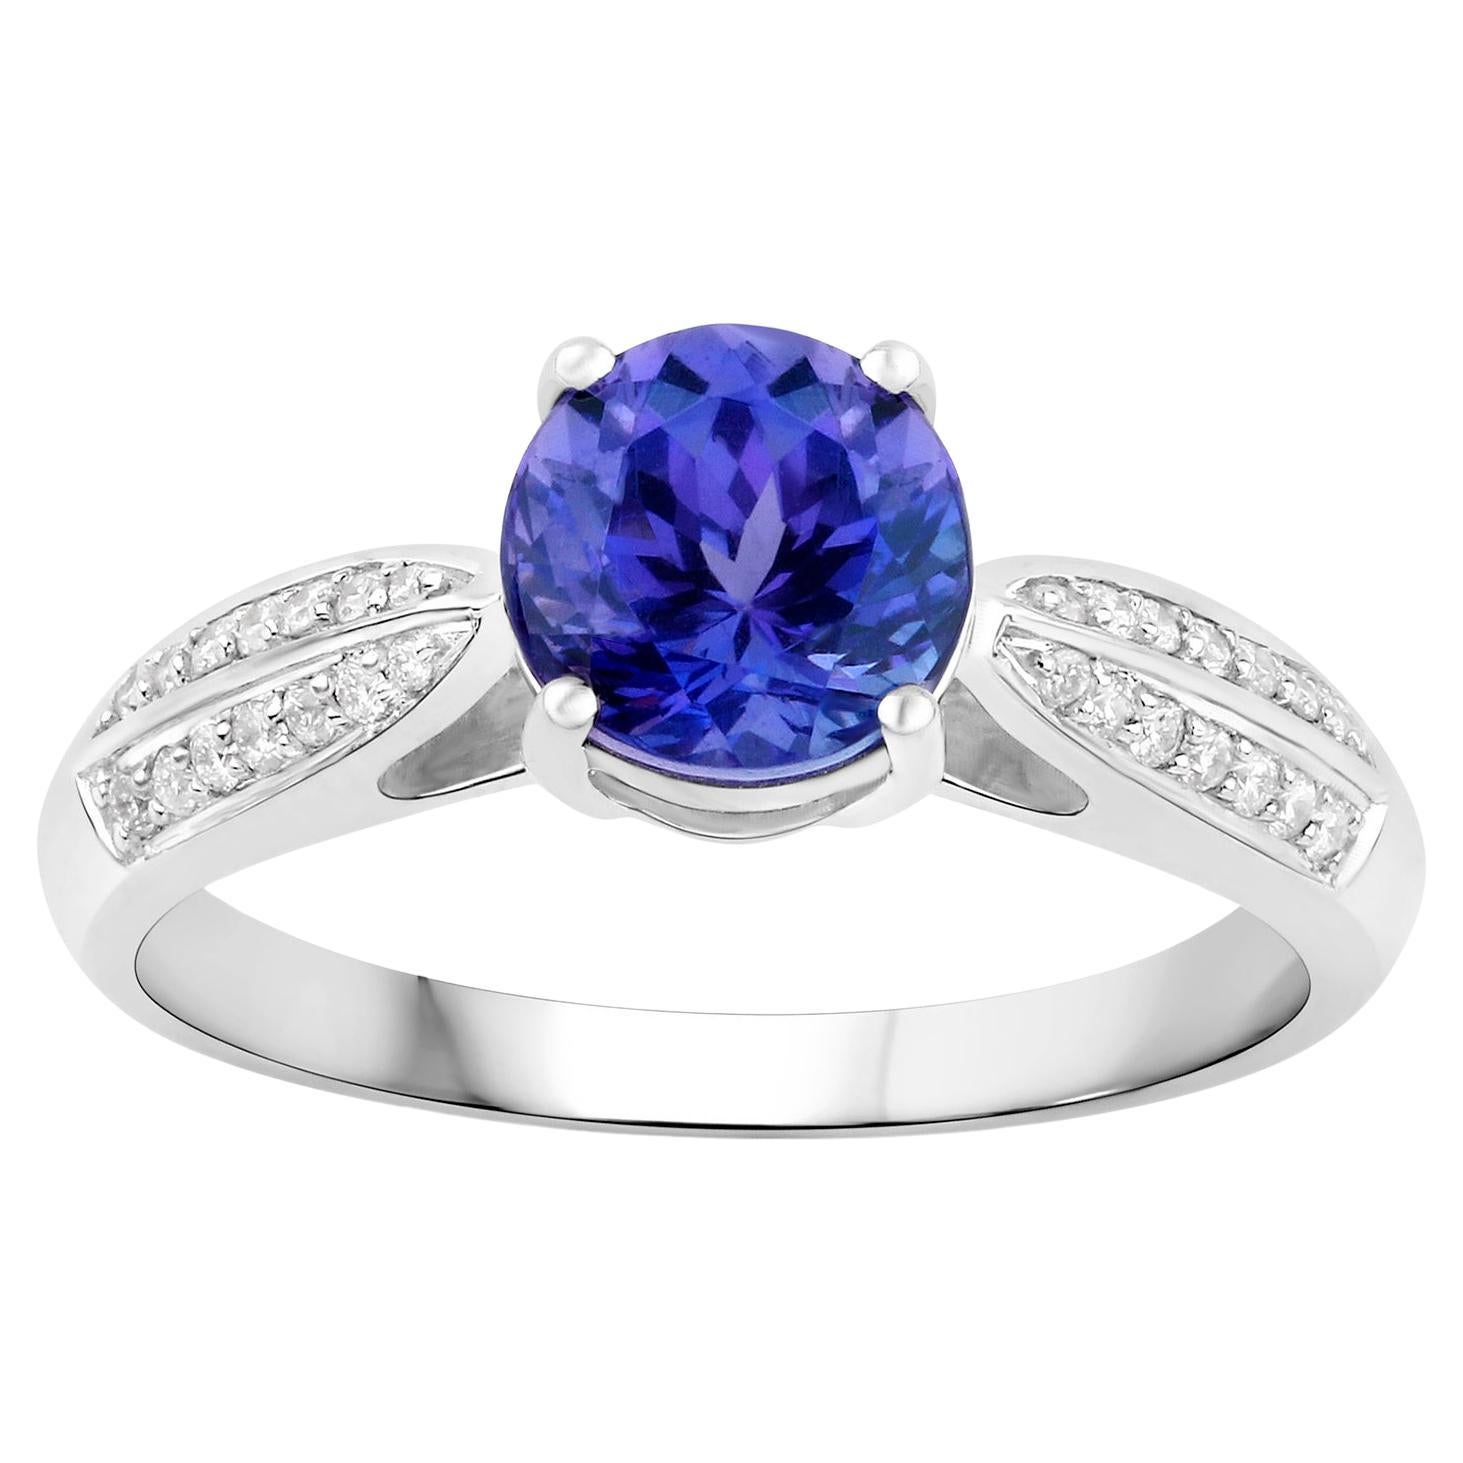 Tanzanite Ring With Diamonds 1.87 Carats 14K White Gold For Sale